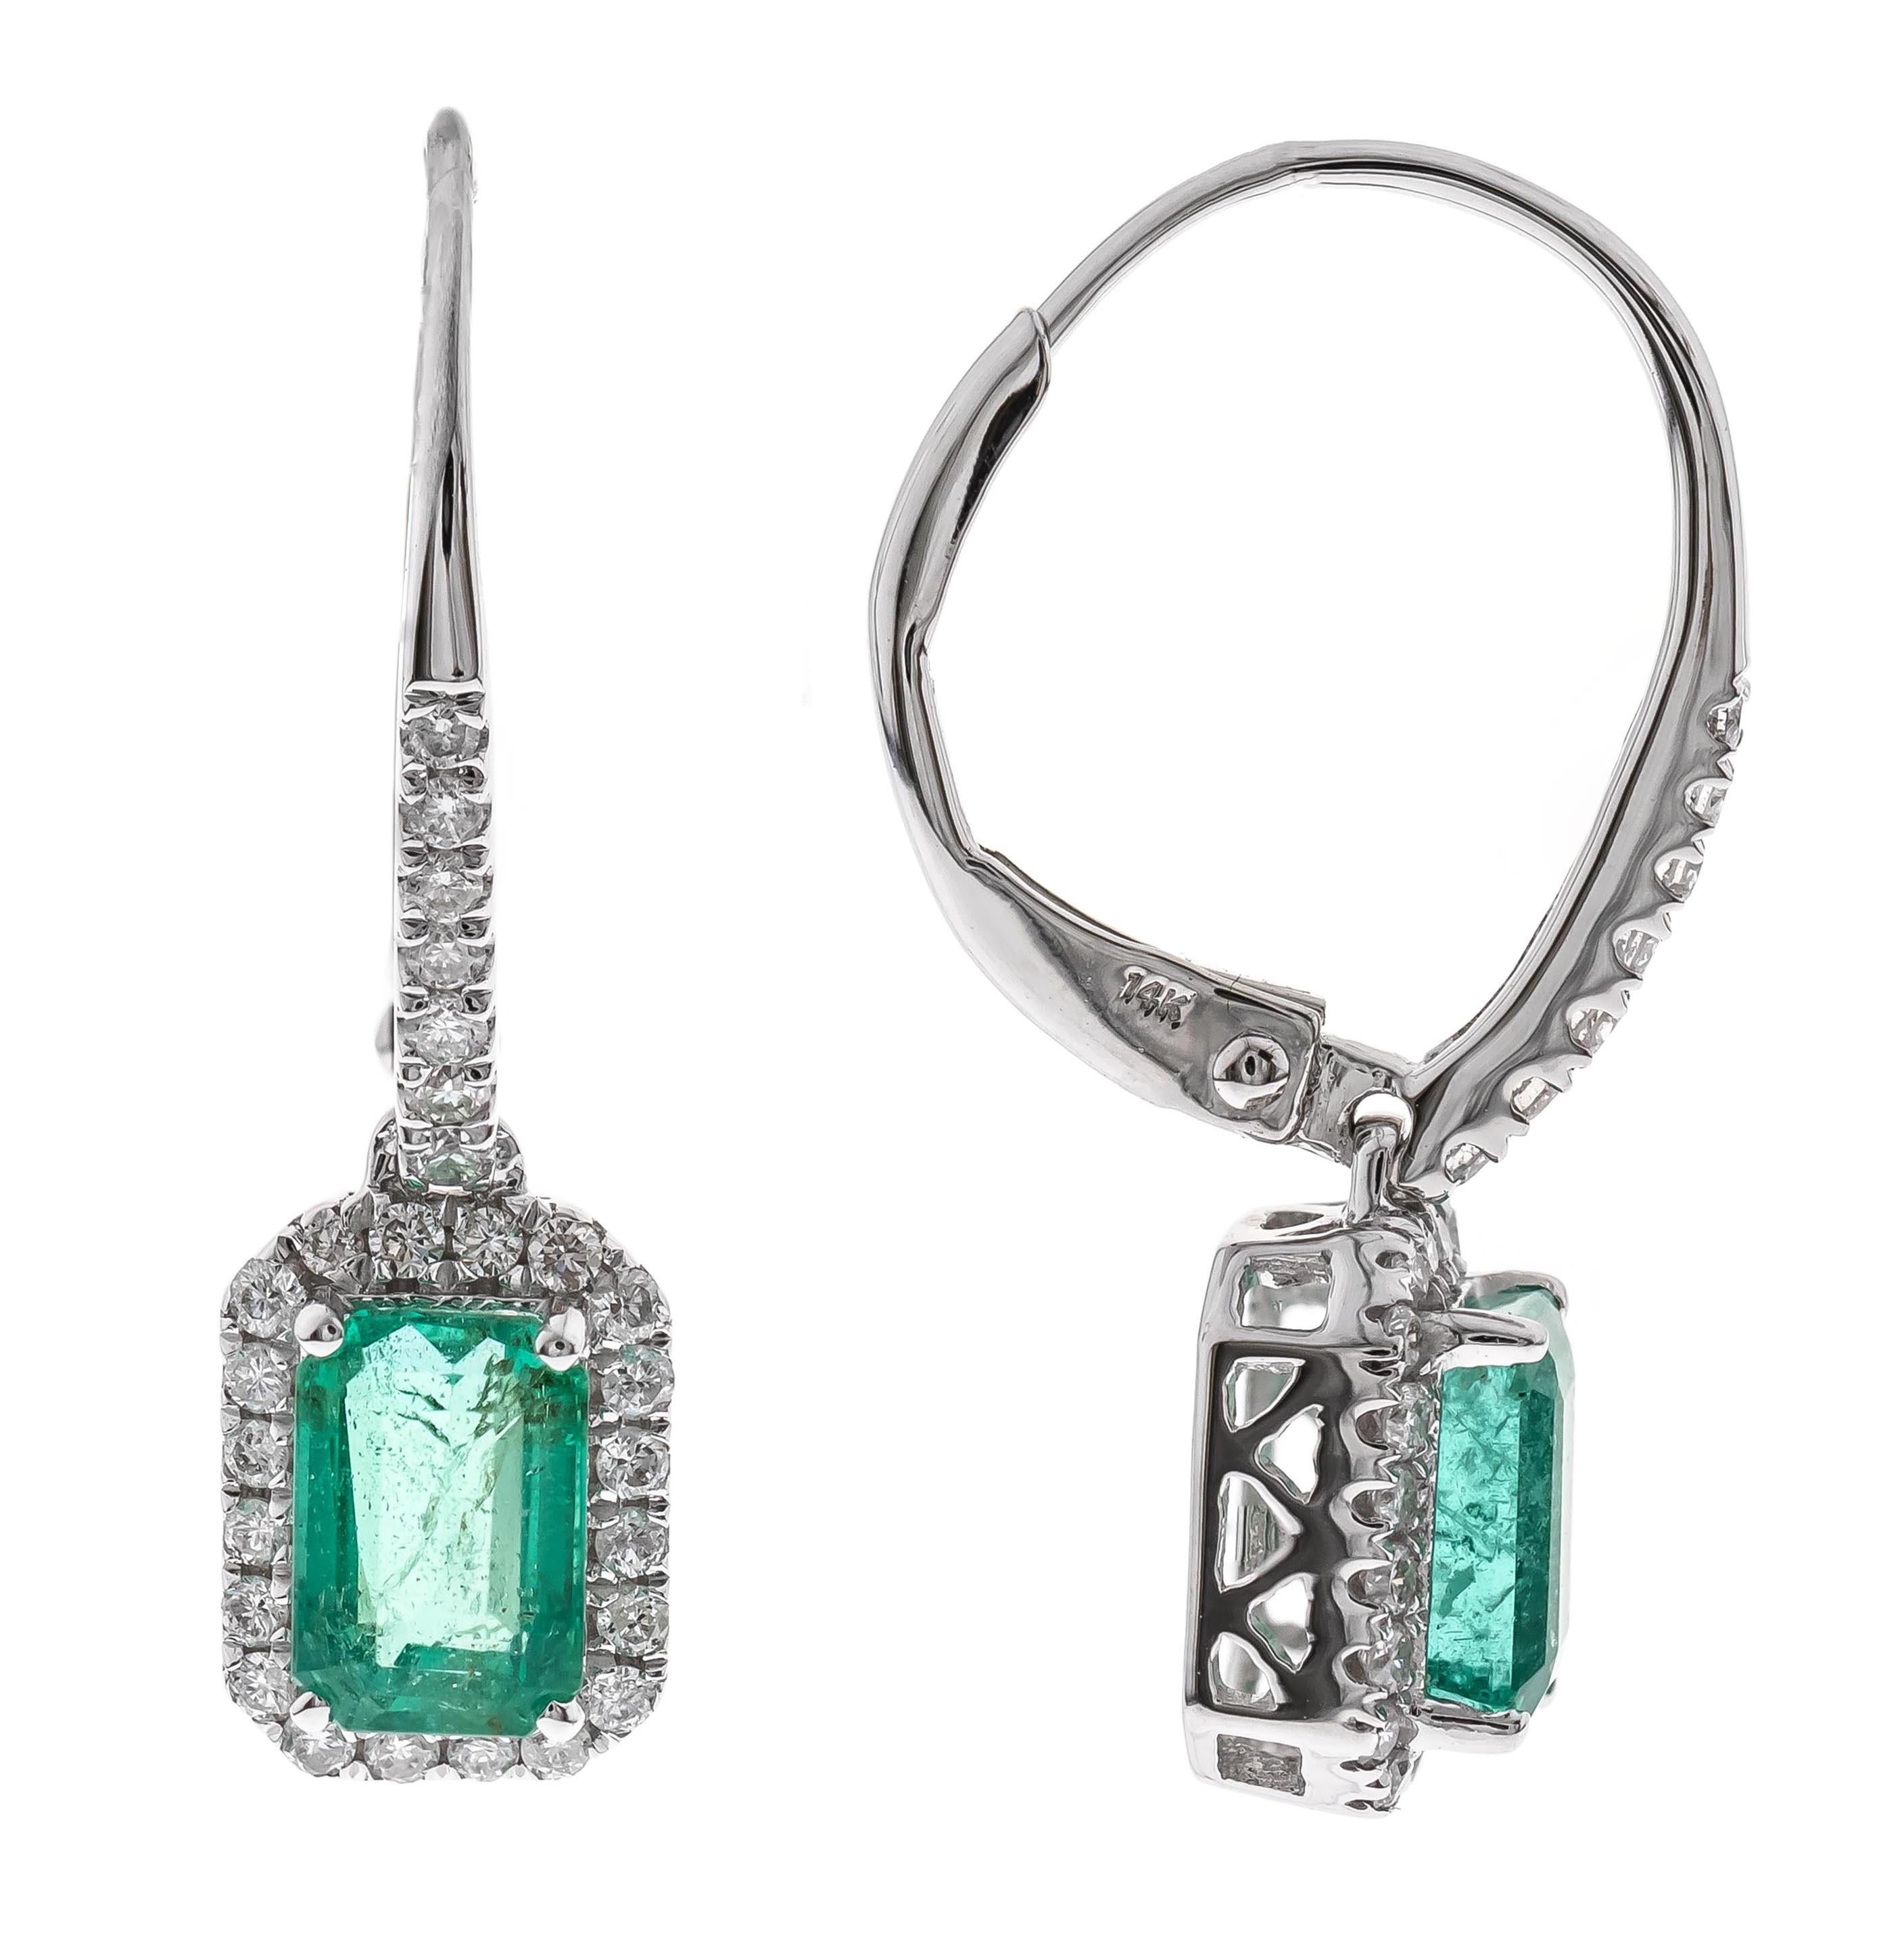 Art Deco 1.22 carat Emerald-cut Emerald With Diamond accents 14K White Gold Earring. For Sale